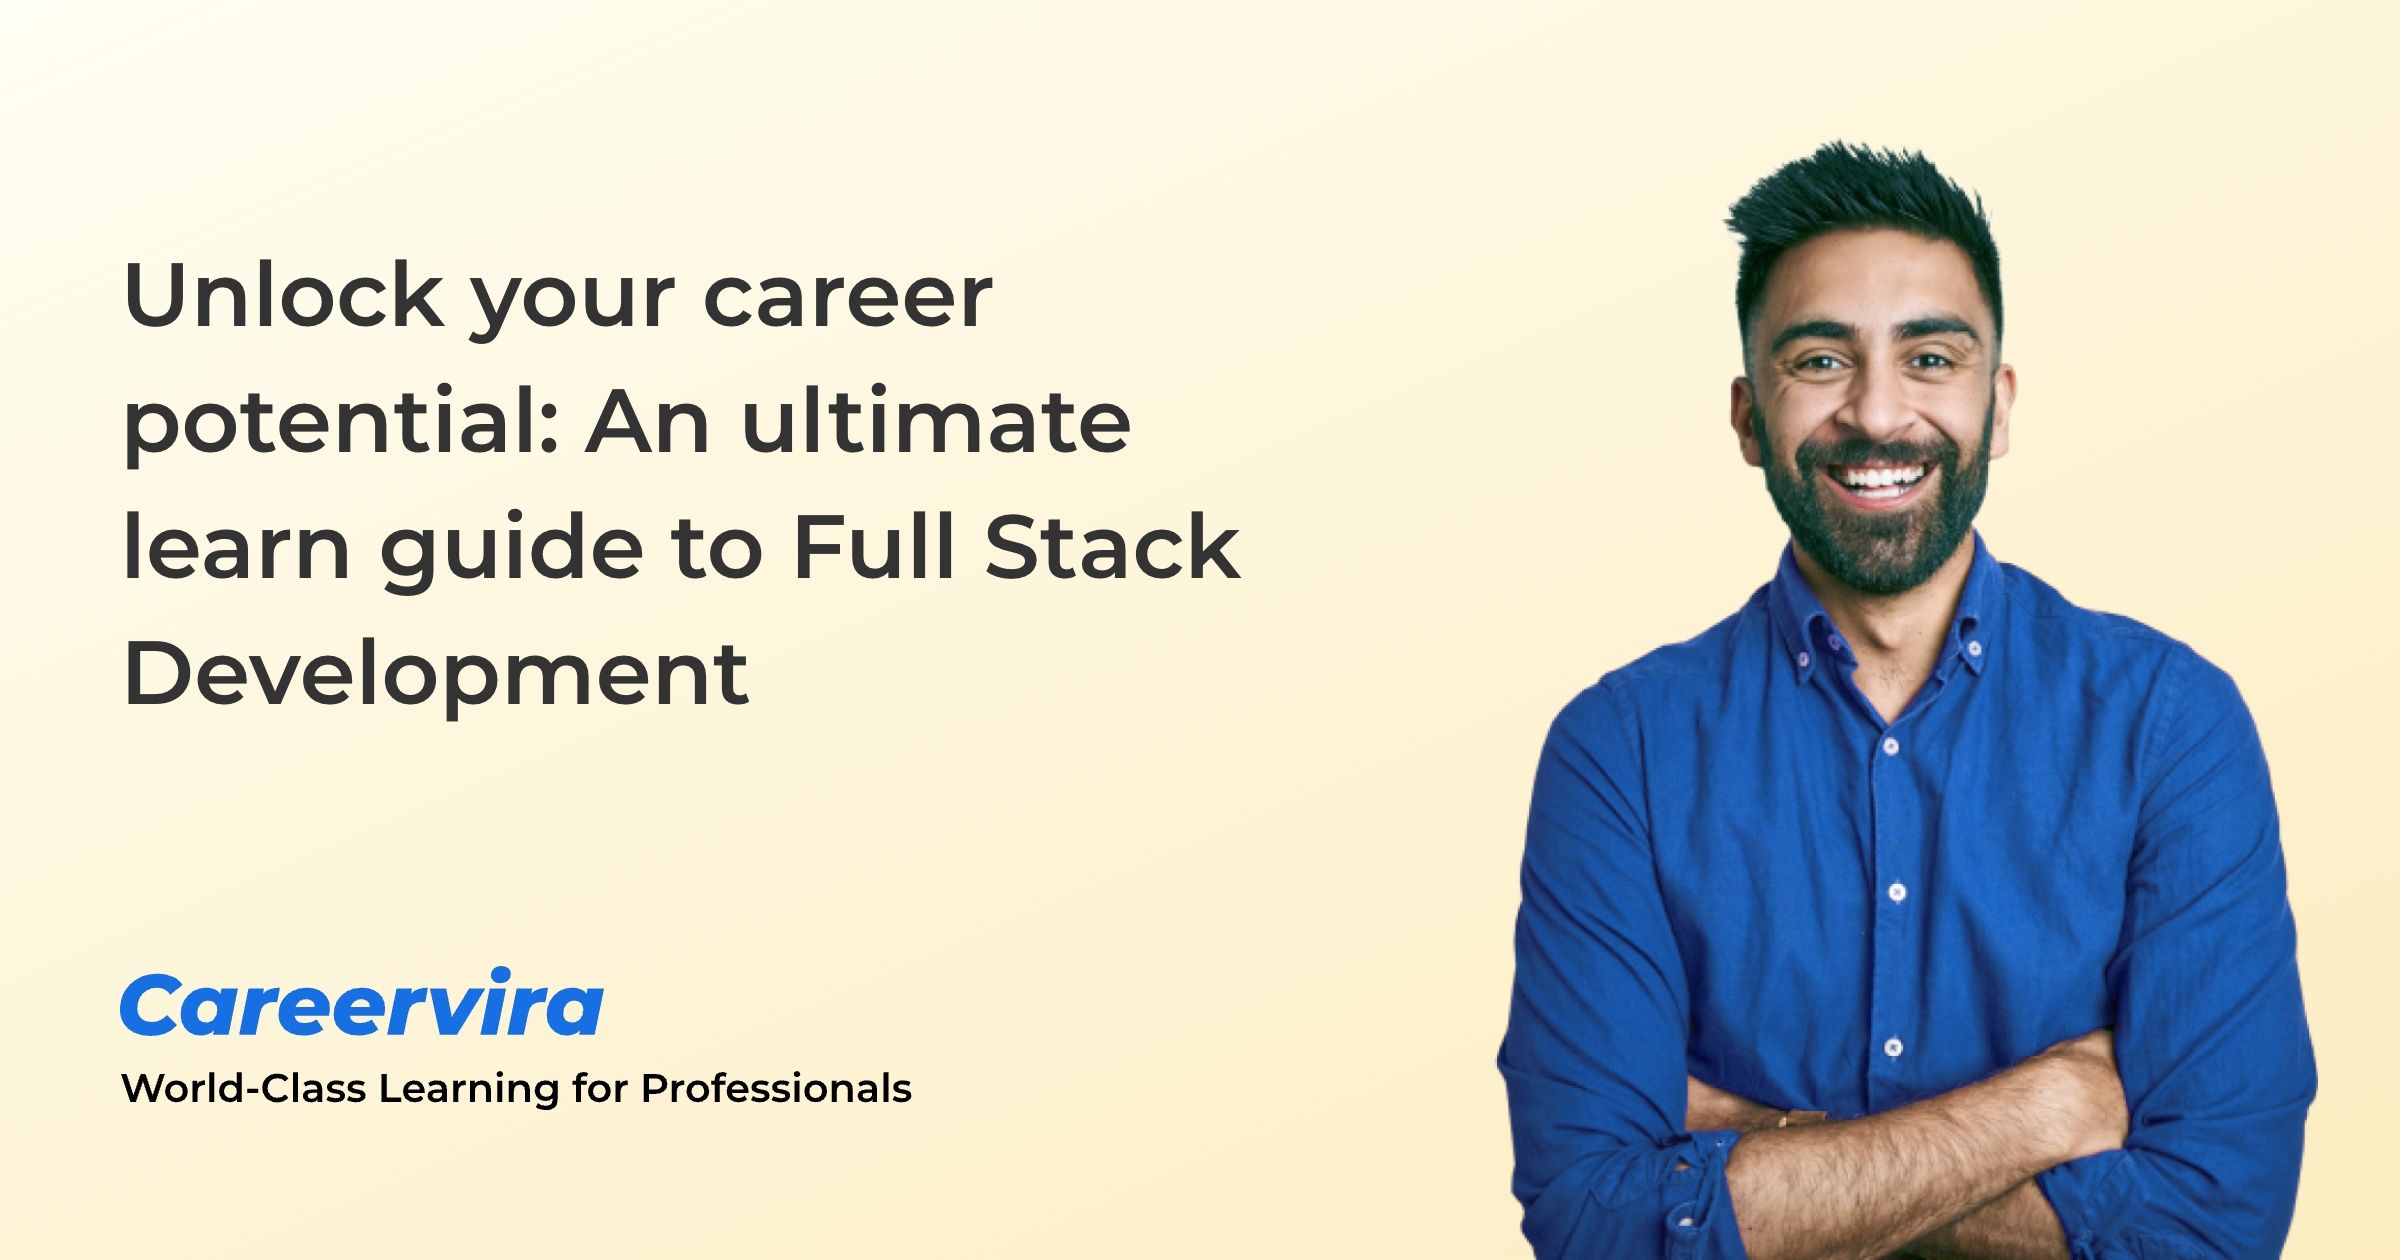 Figure: Unlock your career potential: An ultimate learn guide to Full Stack Development